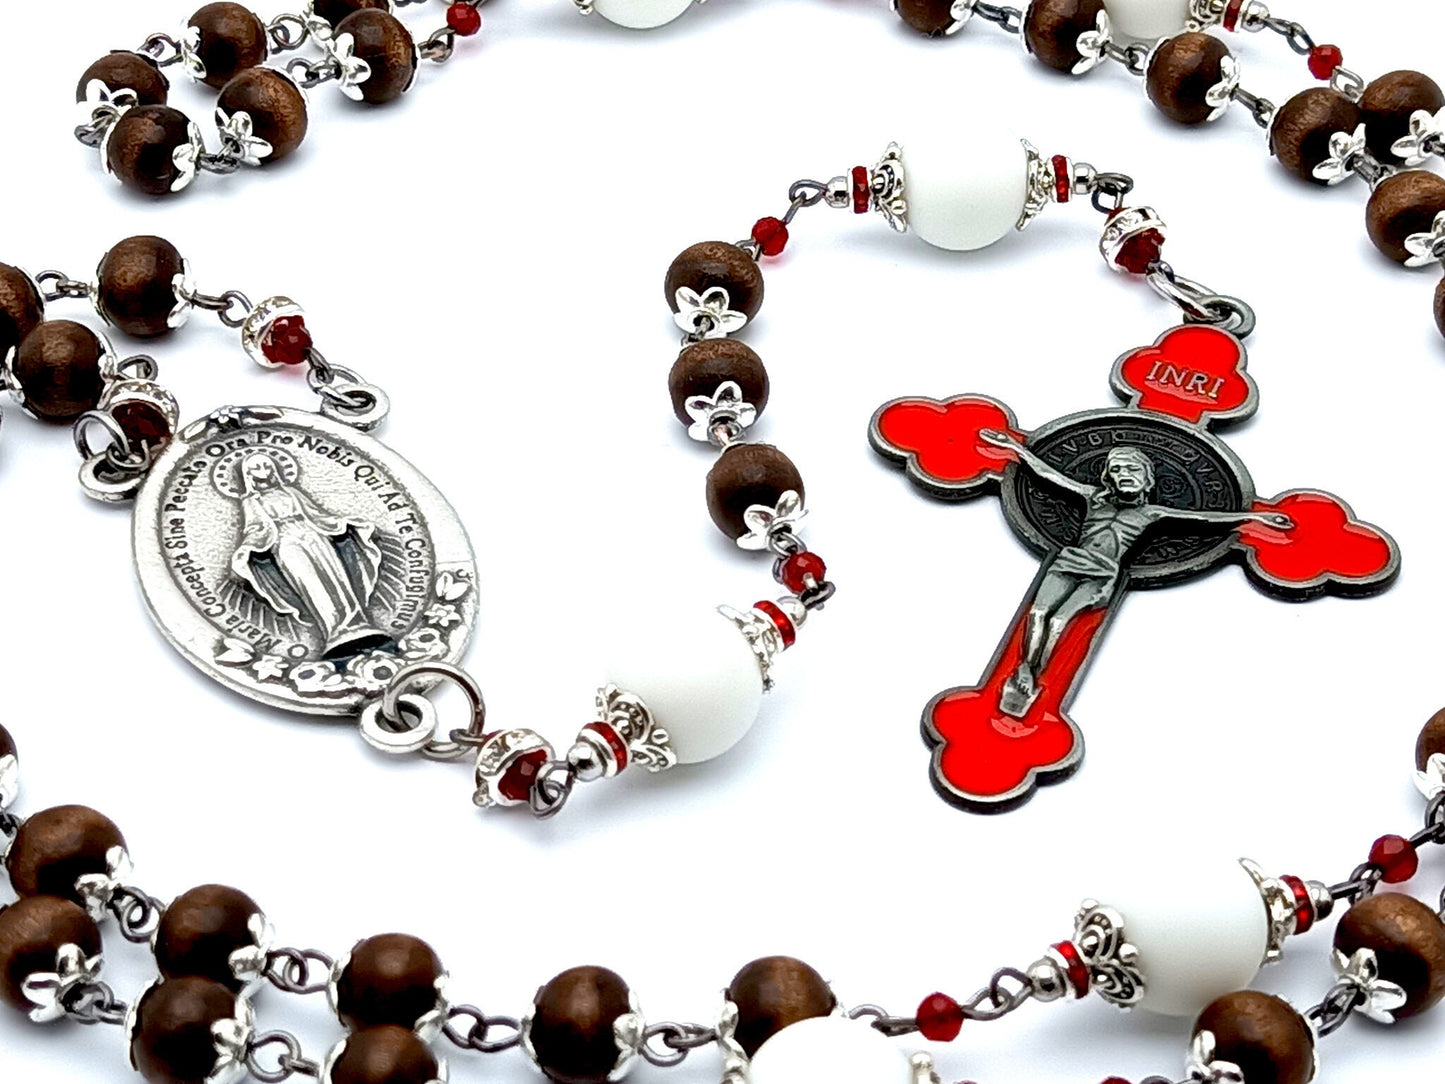 Miraculous medal unique rosary beads with wood and alabaster gemstone beads and red enamel Saint Benedict crucifix.